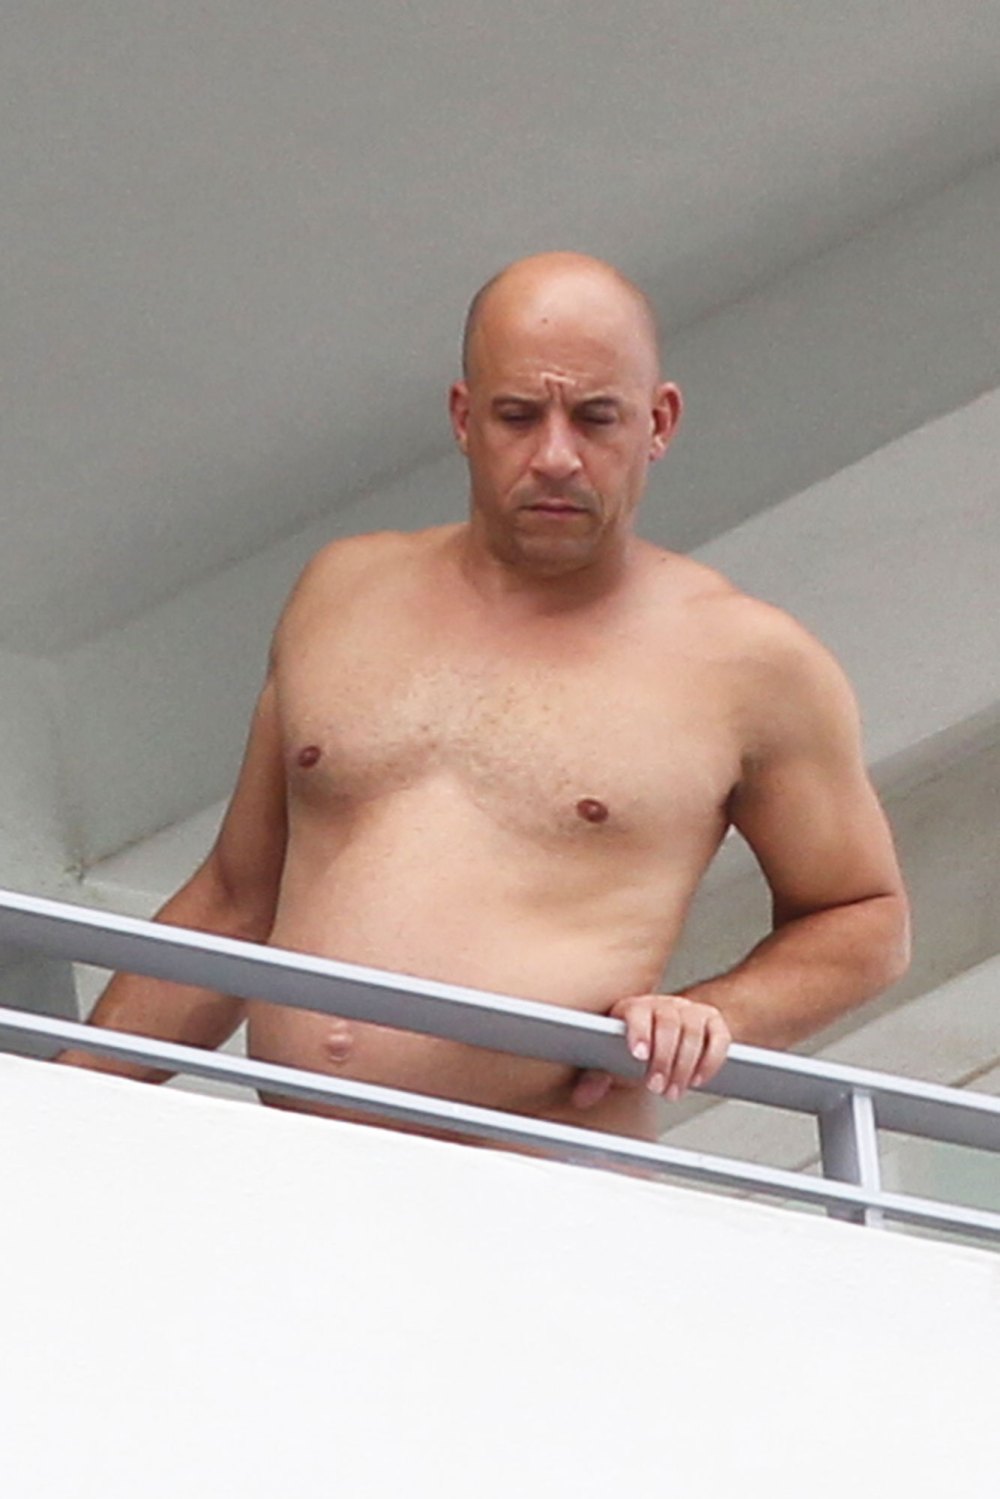 Vin Diesel Showcases Softer Figure While Lounging Shirtless in Miami — See His Not-So-Buff Bod